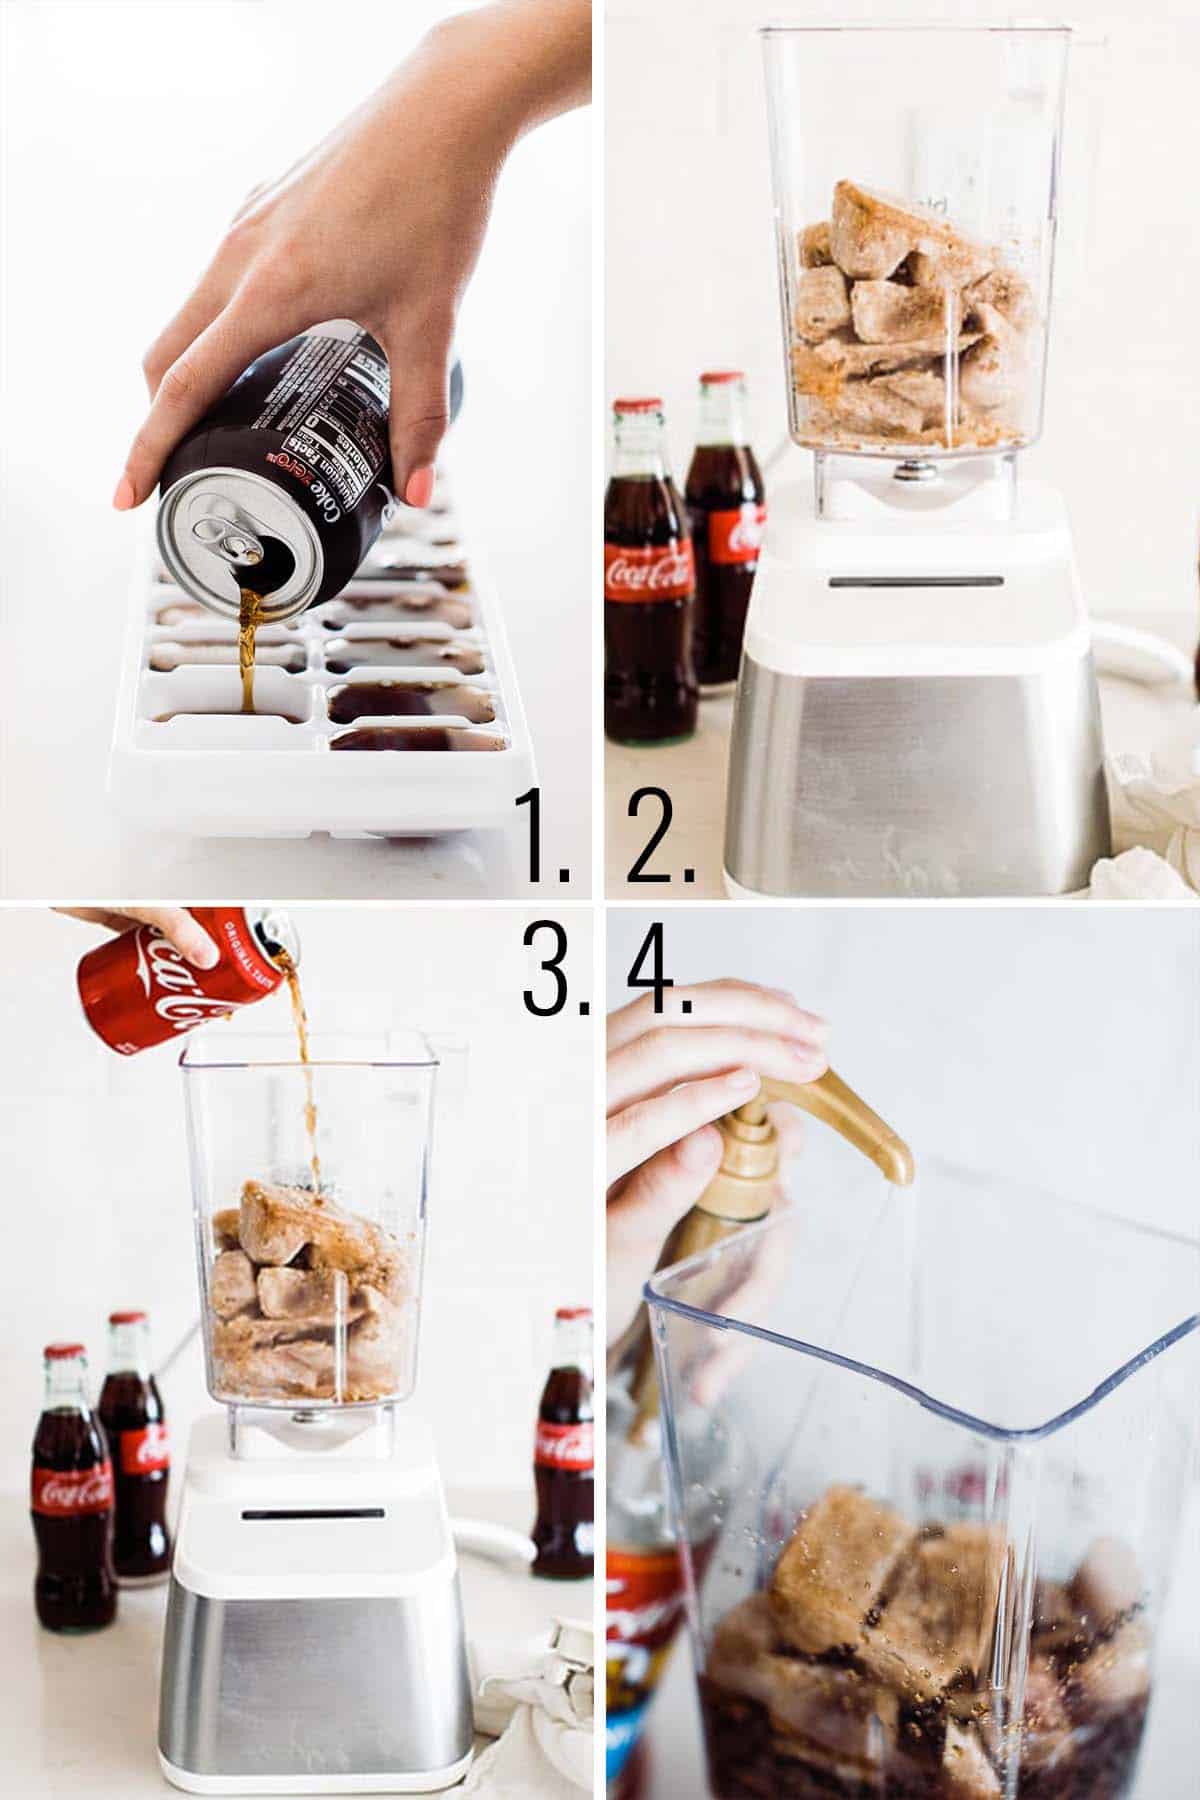 A collage of images showing how to make coke icee in a blender.